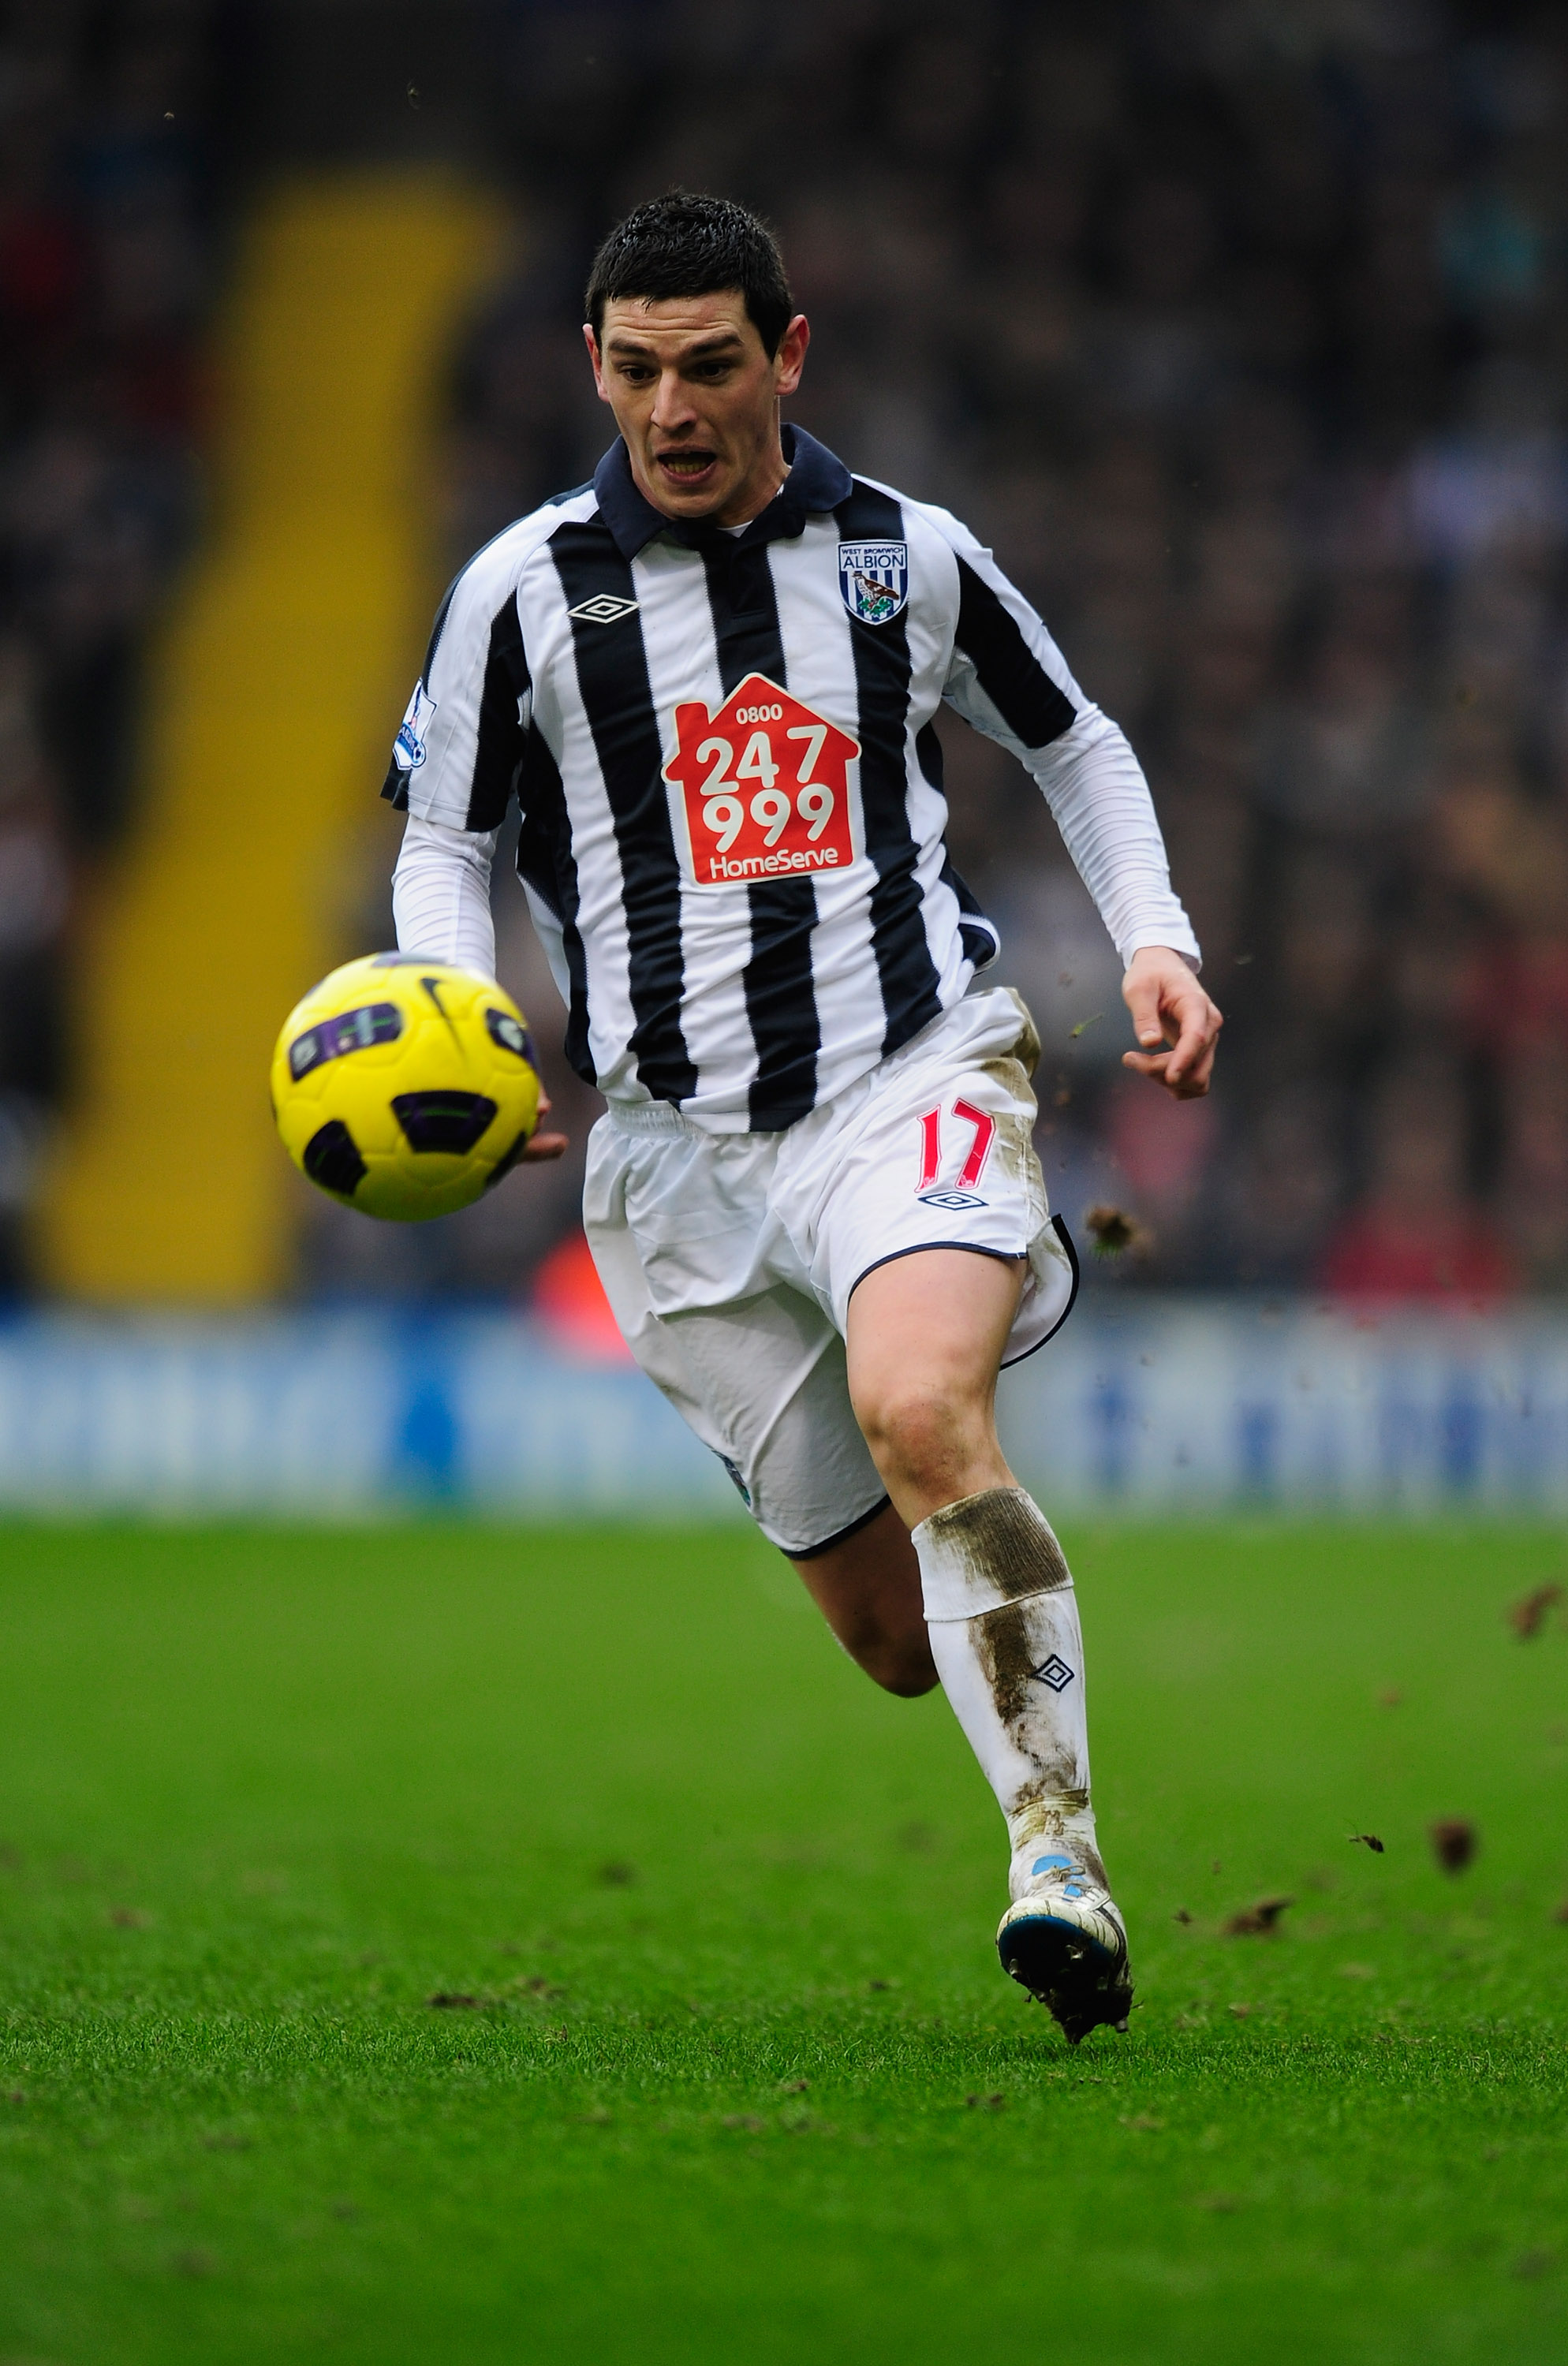 WEST BROMWICH, ENGLAND - FEBRUARY 20:  Graham Dorrans of West Bromwich Albion in action during the Barclays Premier League match between West Bromwich Albion and Wolverhampton Wanderers at The Hawthorns on February 20, 2011 in West Bromwich, England.  (Ph